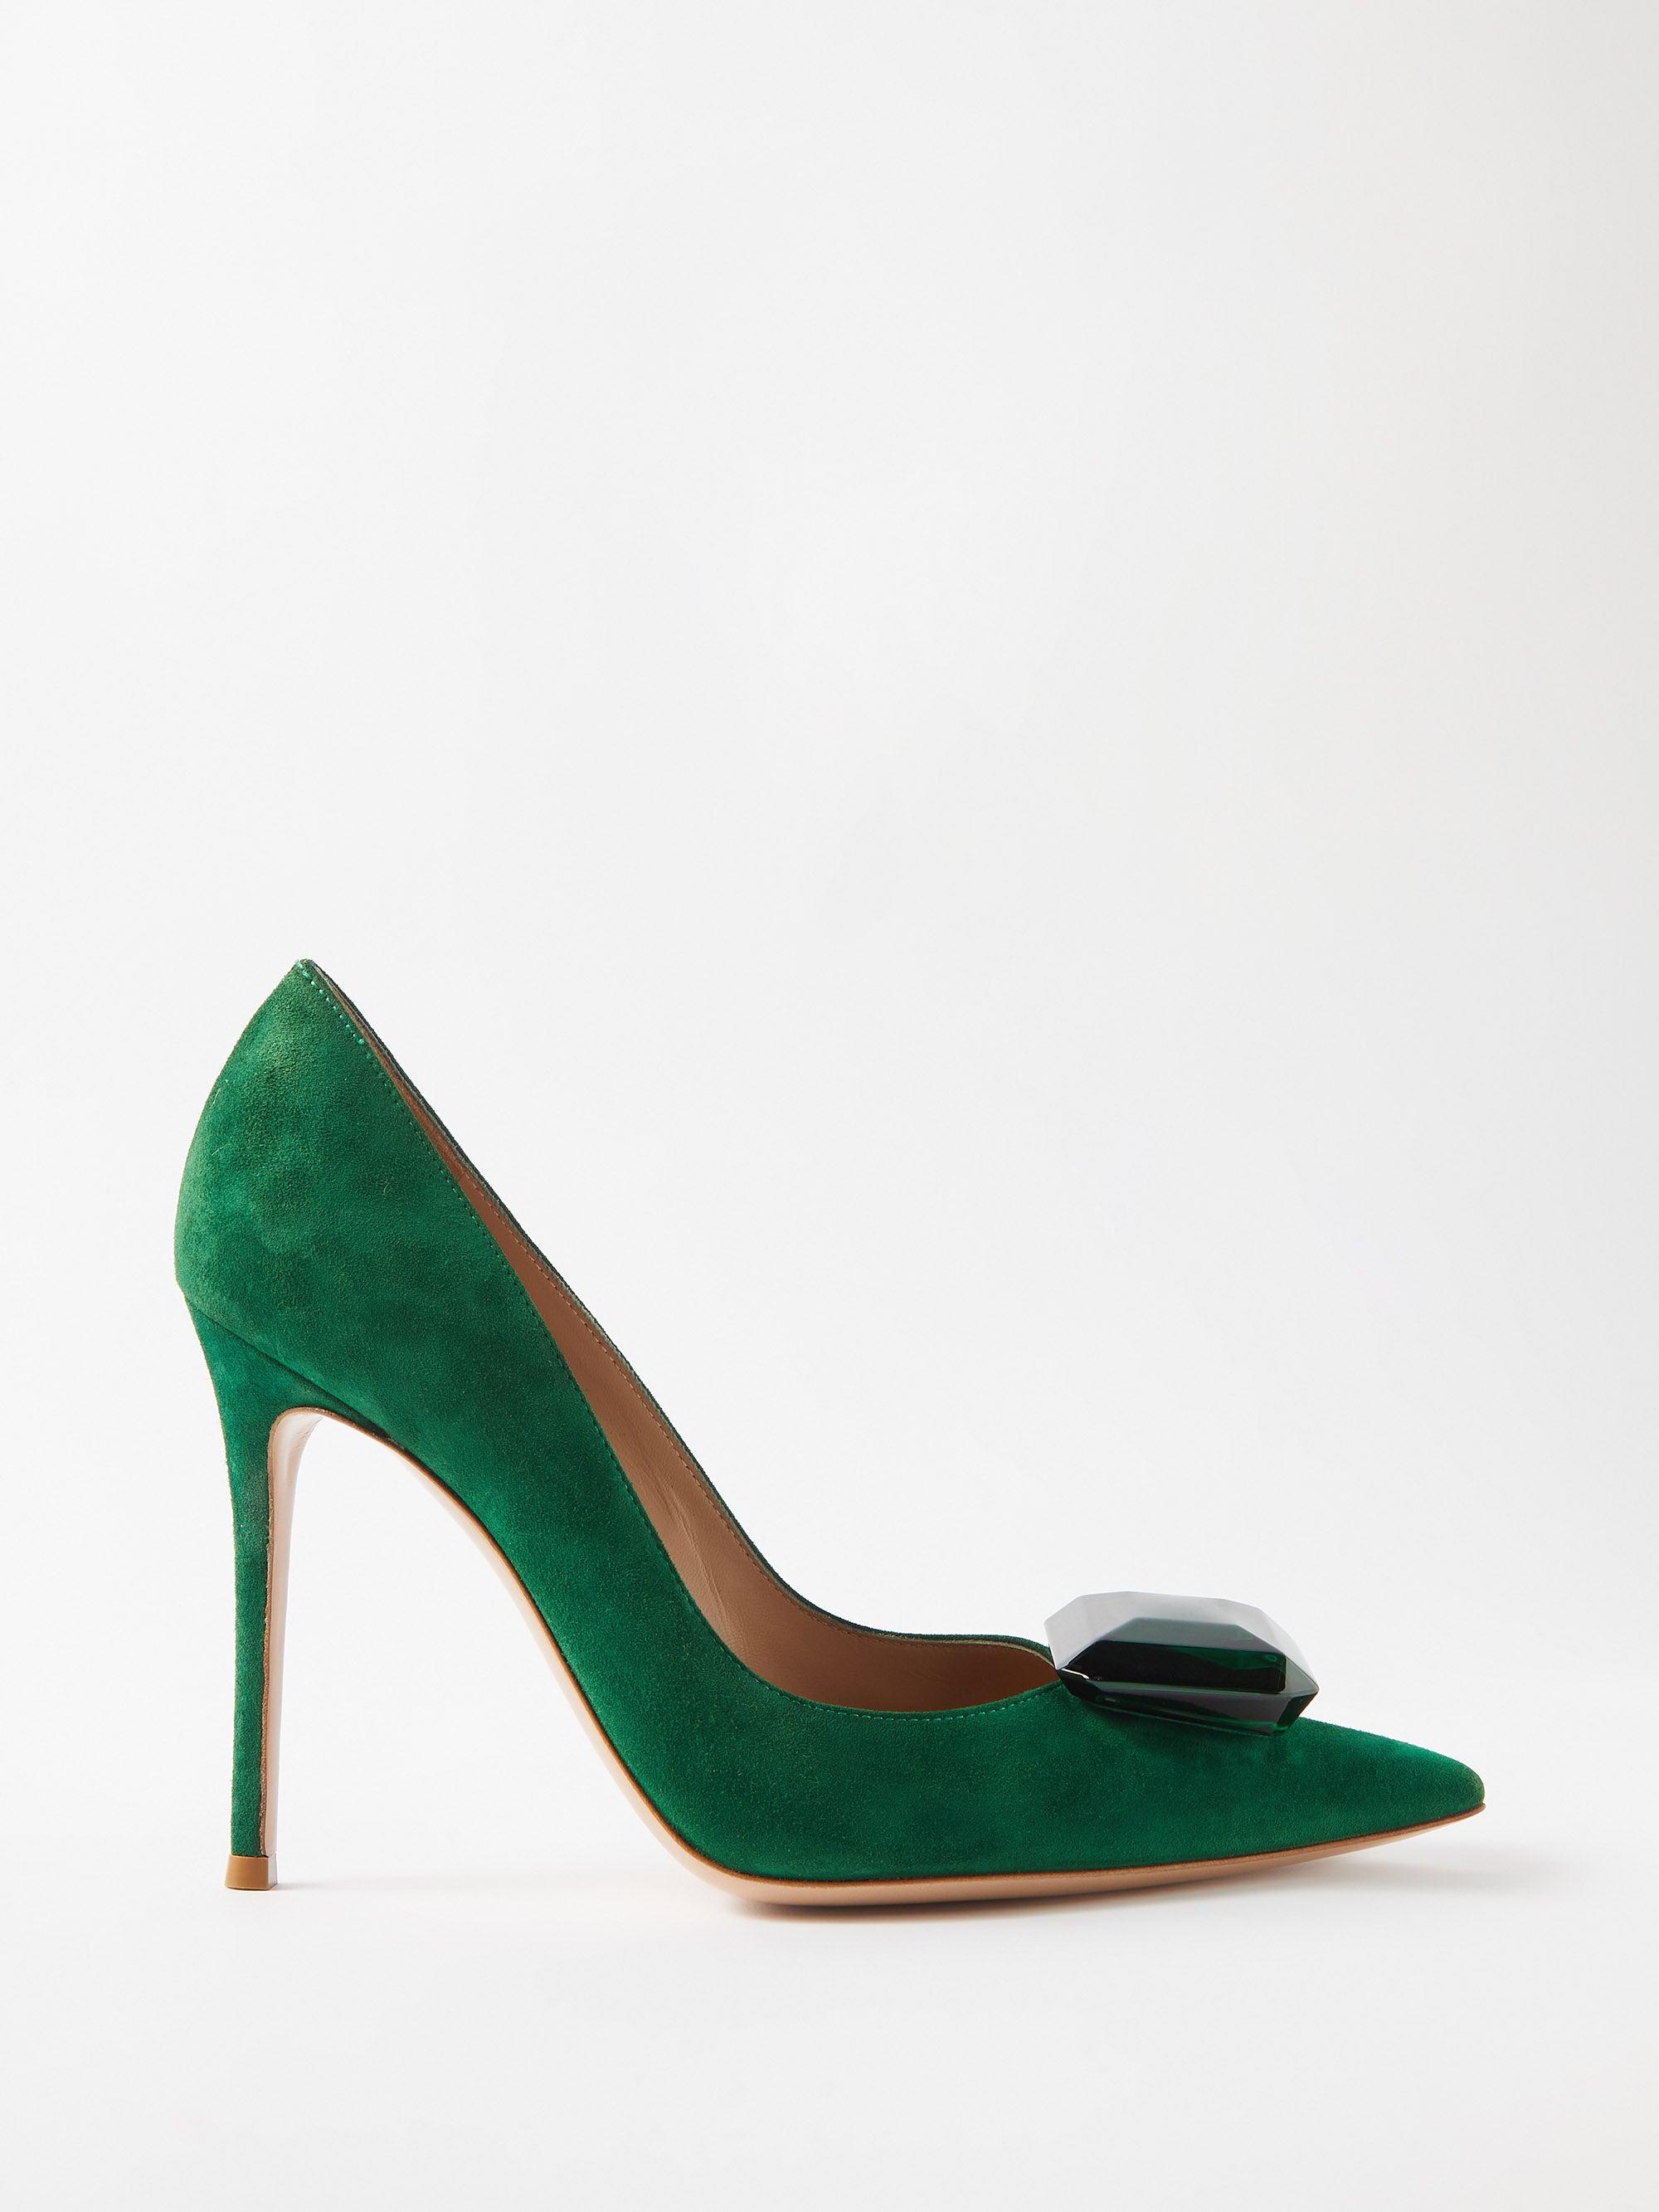 Gianvito Rossi Jaipur 105 Crystal-embellished Suede Pumps in Green | Lyst